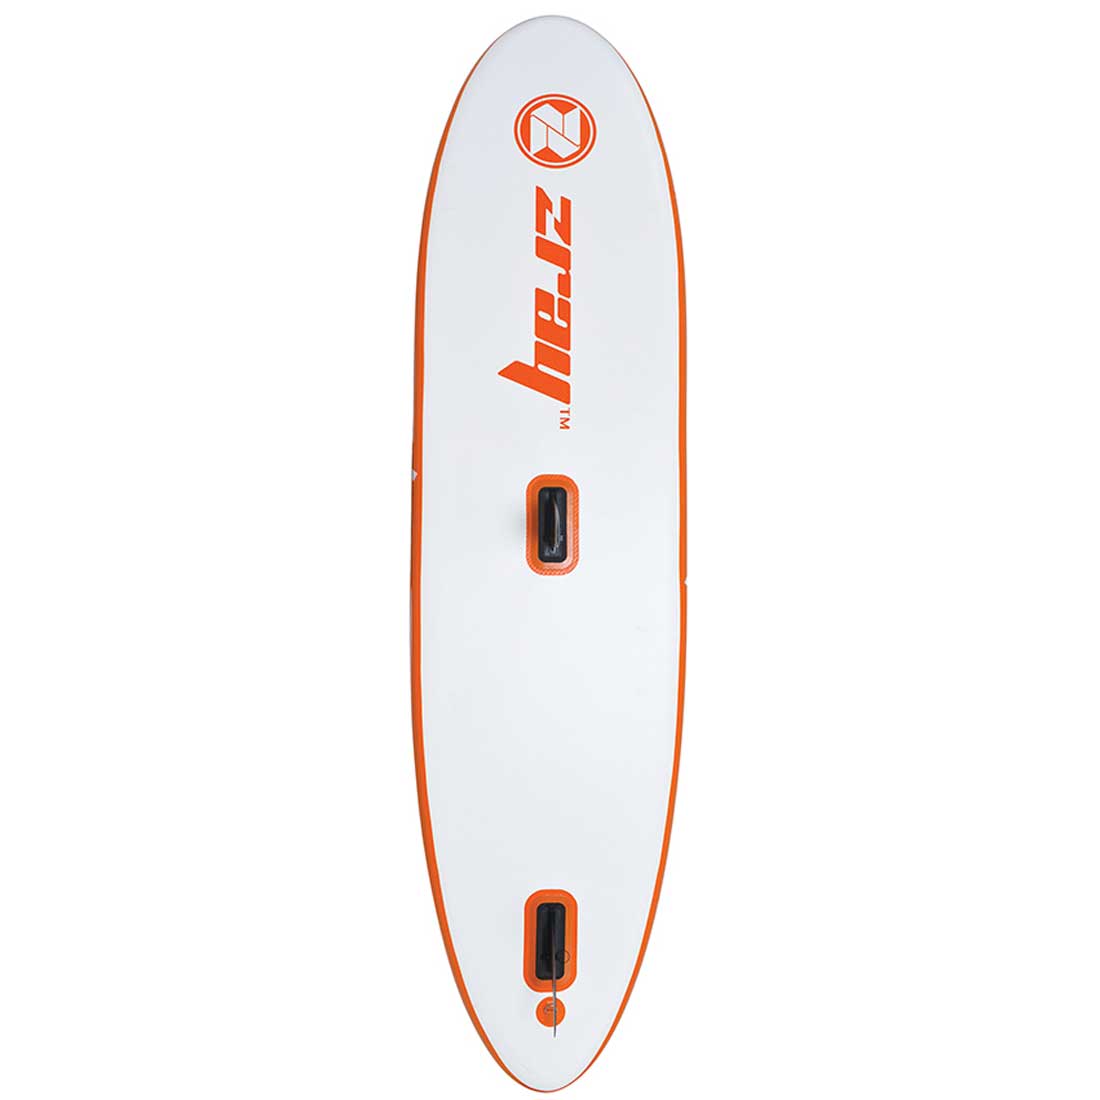 Stand up paddle board W1 ZRAY - Dessous